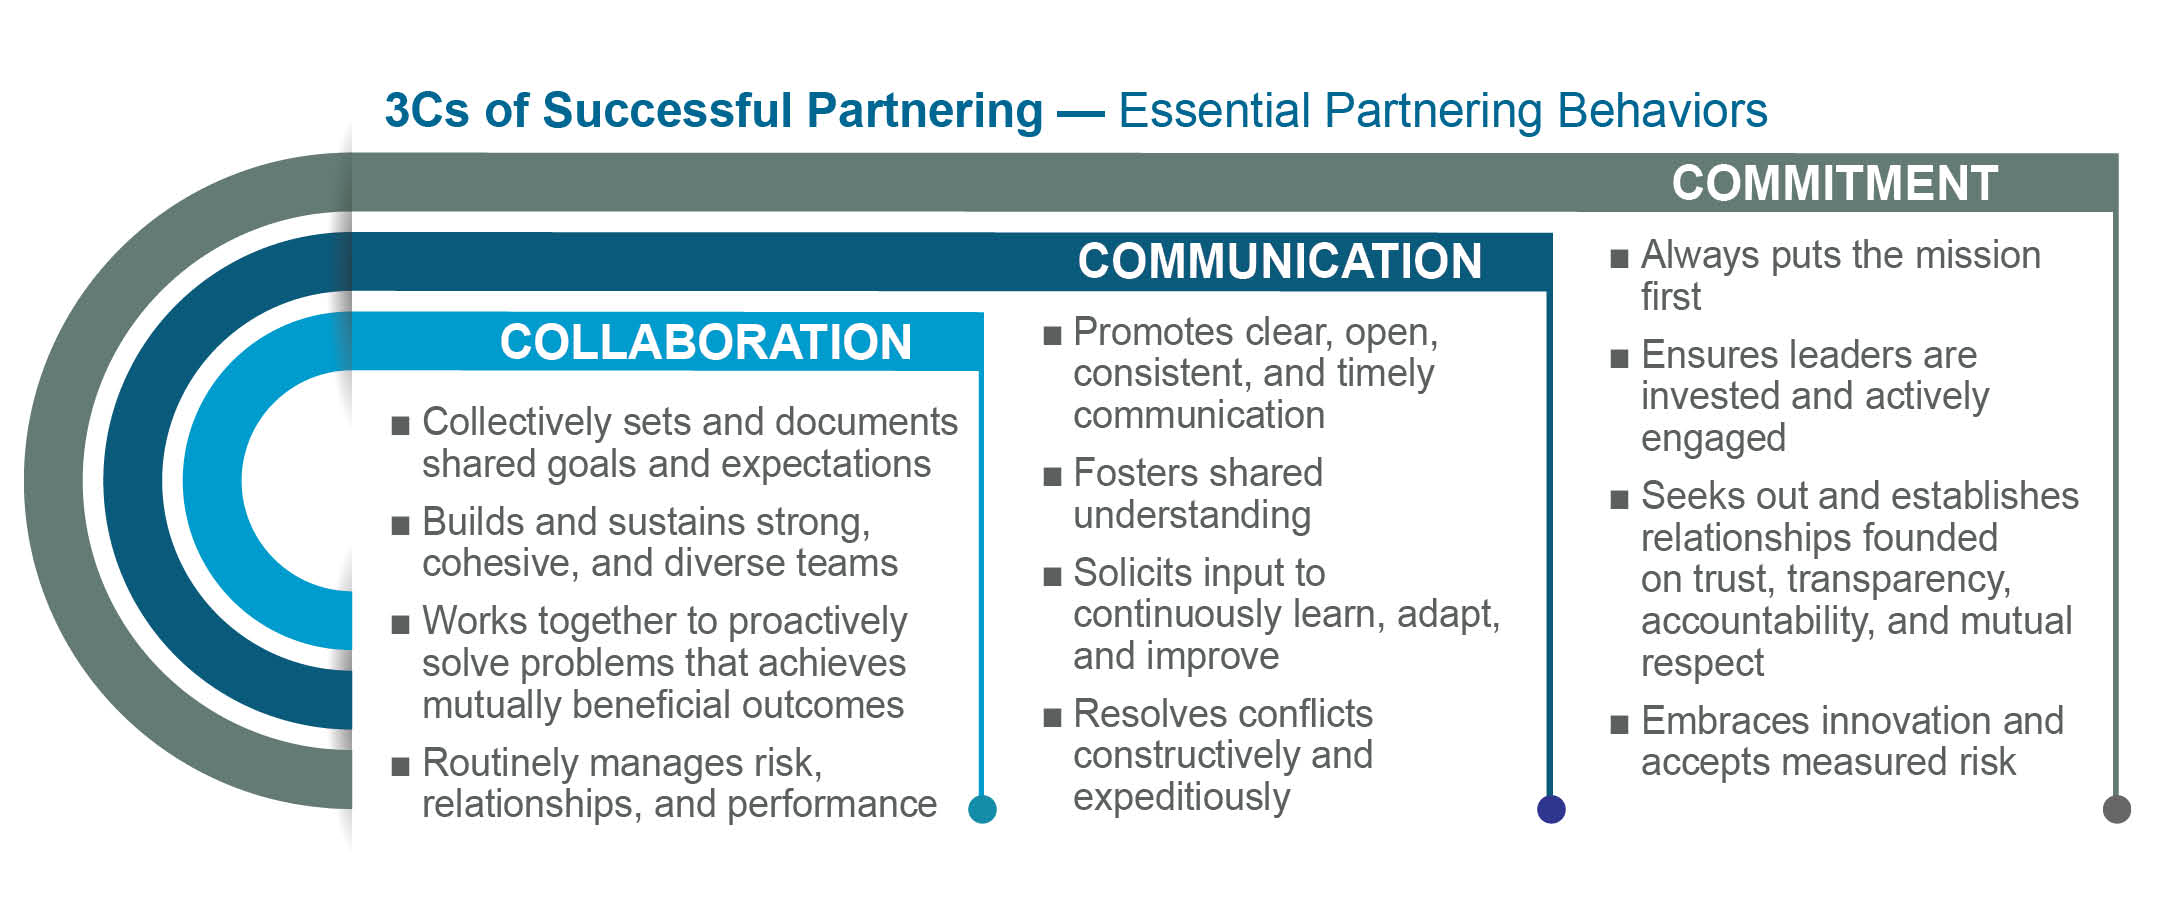 3C's of Partnering: Collaboration, Communication, Commitment